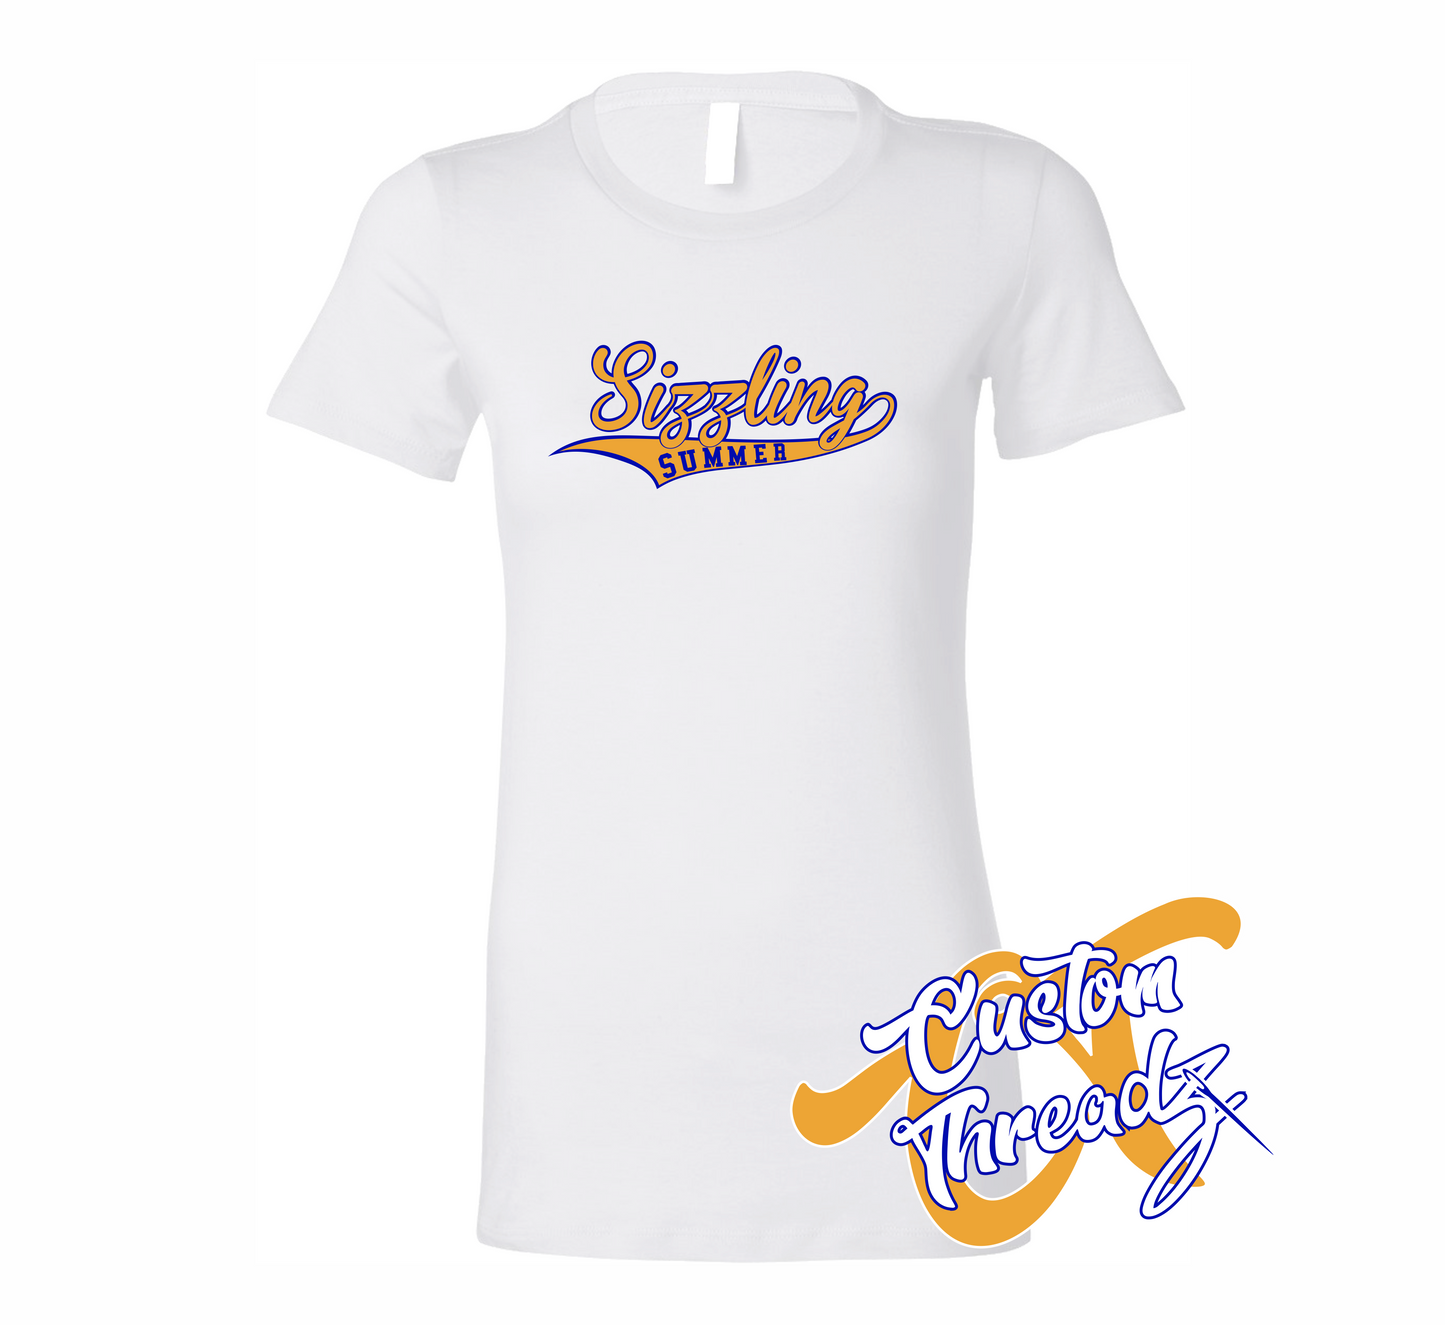 white womens tee with sizzling summer DTG printed design